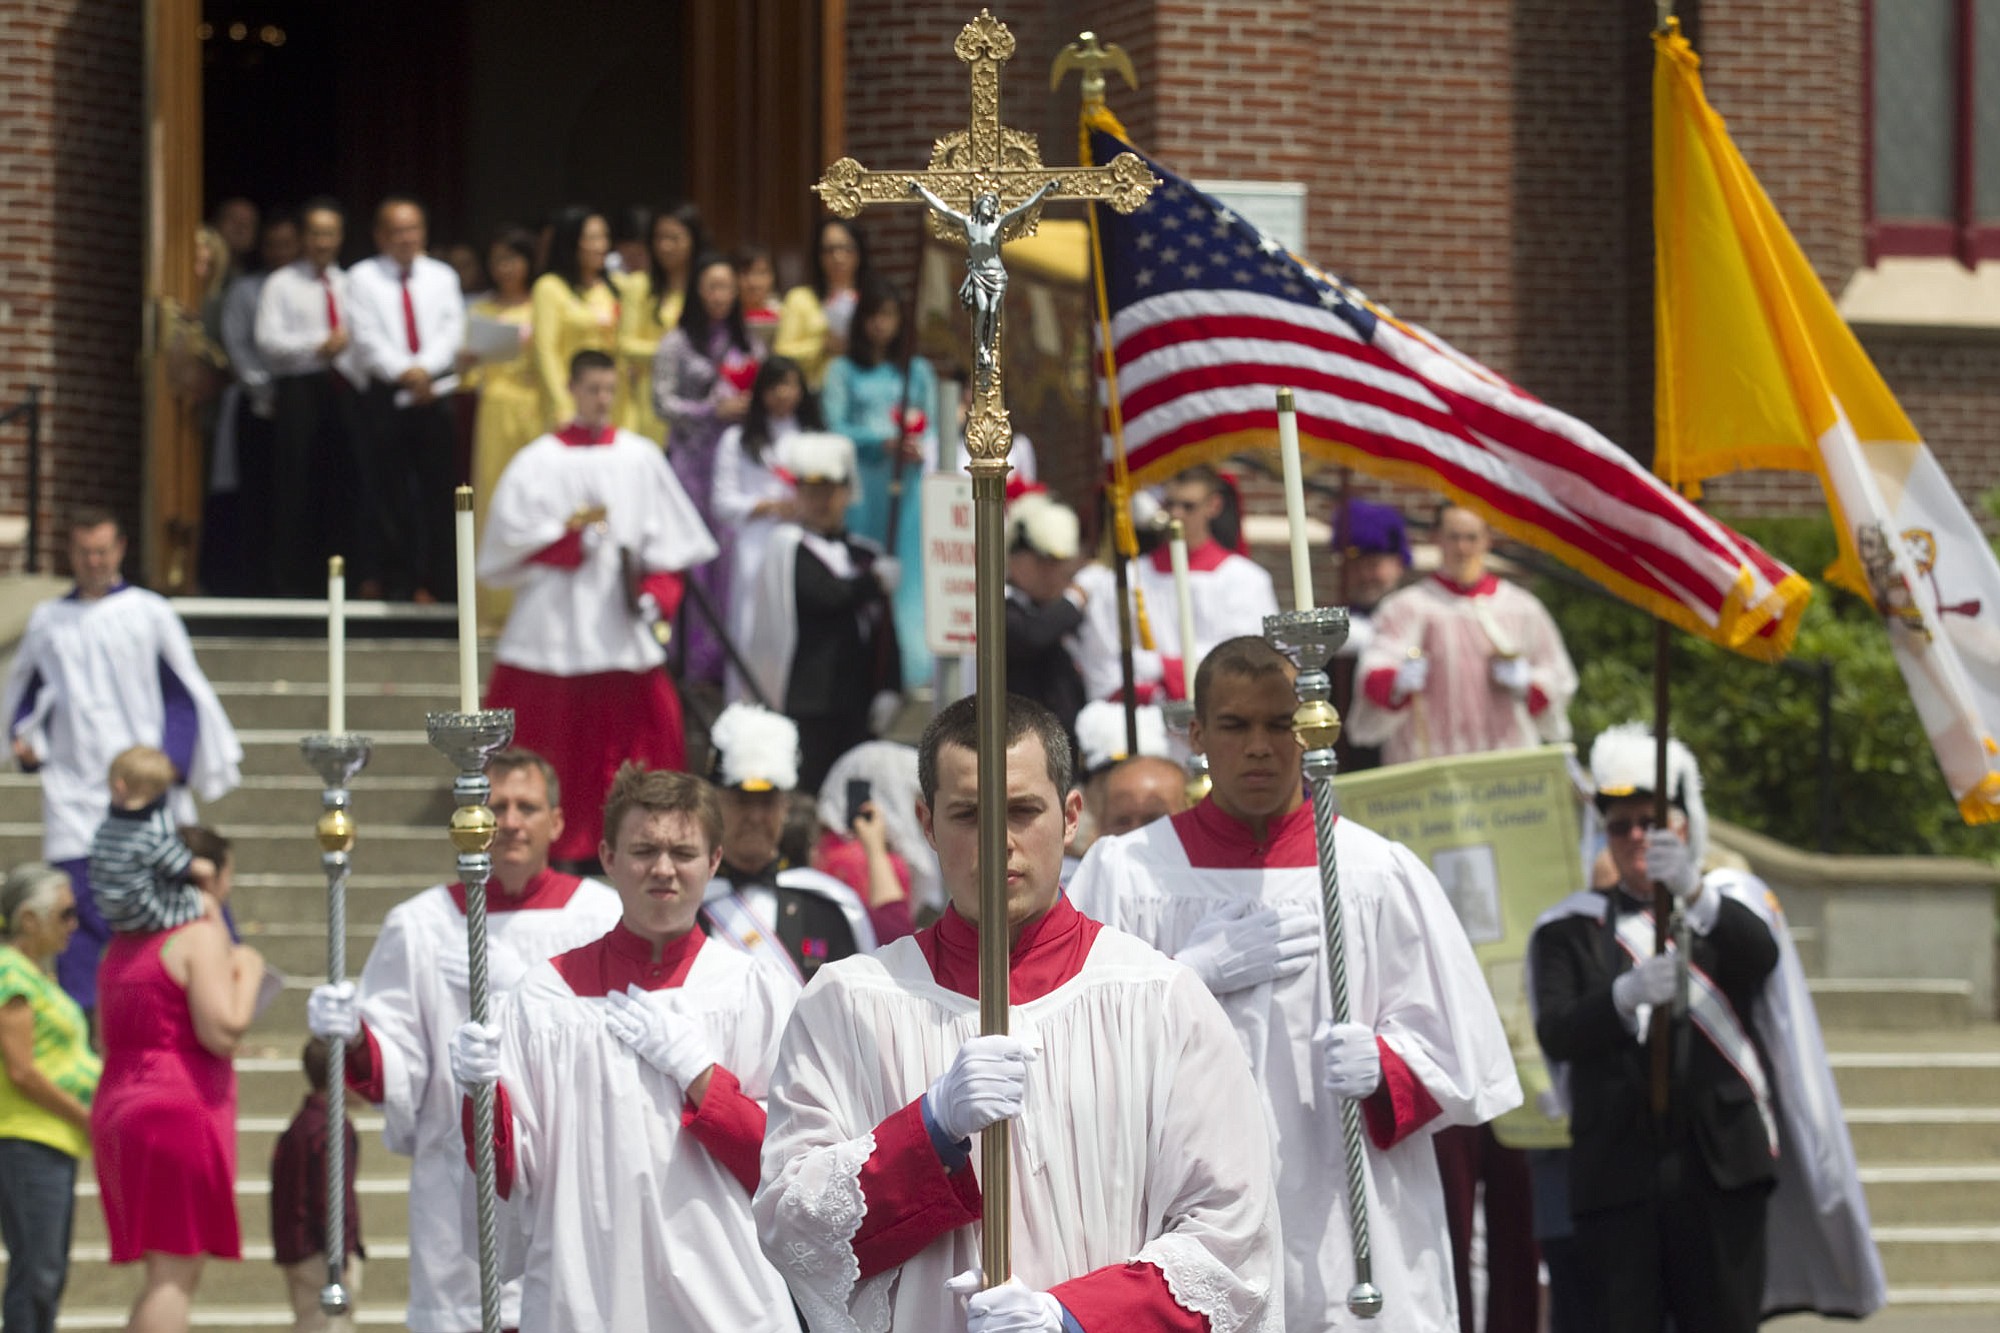 An altar server emerges, carrying a cross, from the Proto-Cathedral of St. James the Greater on Sunday.